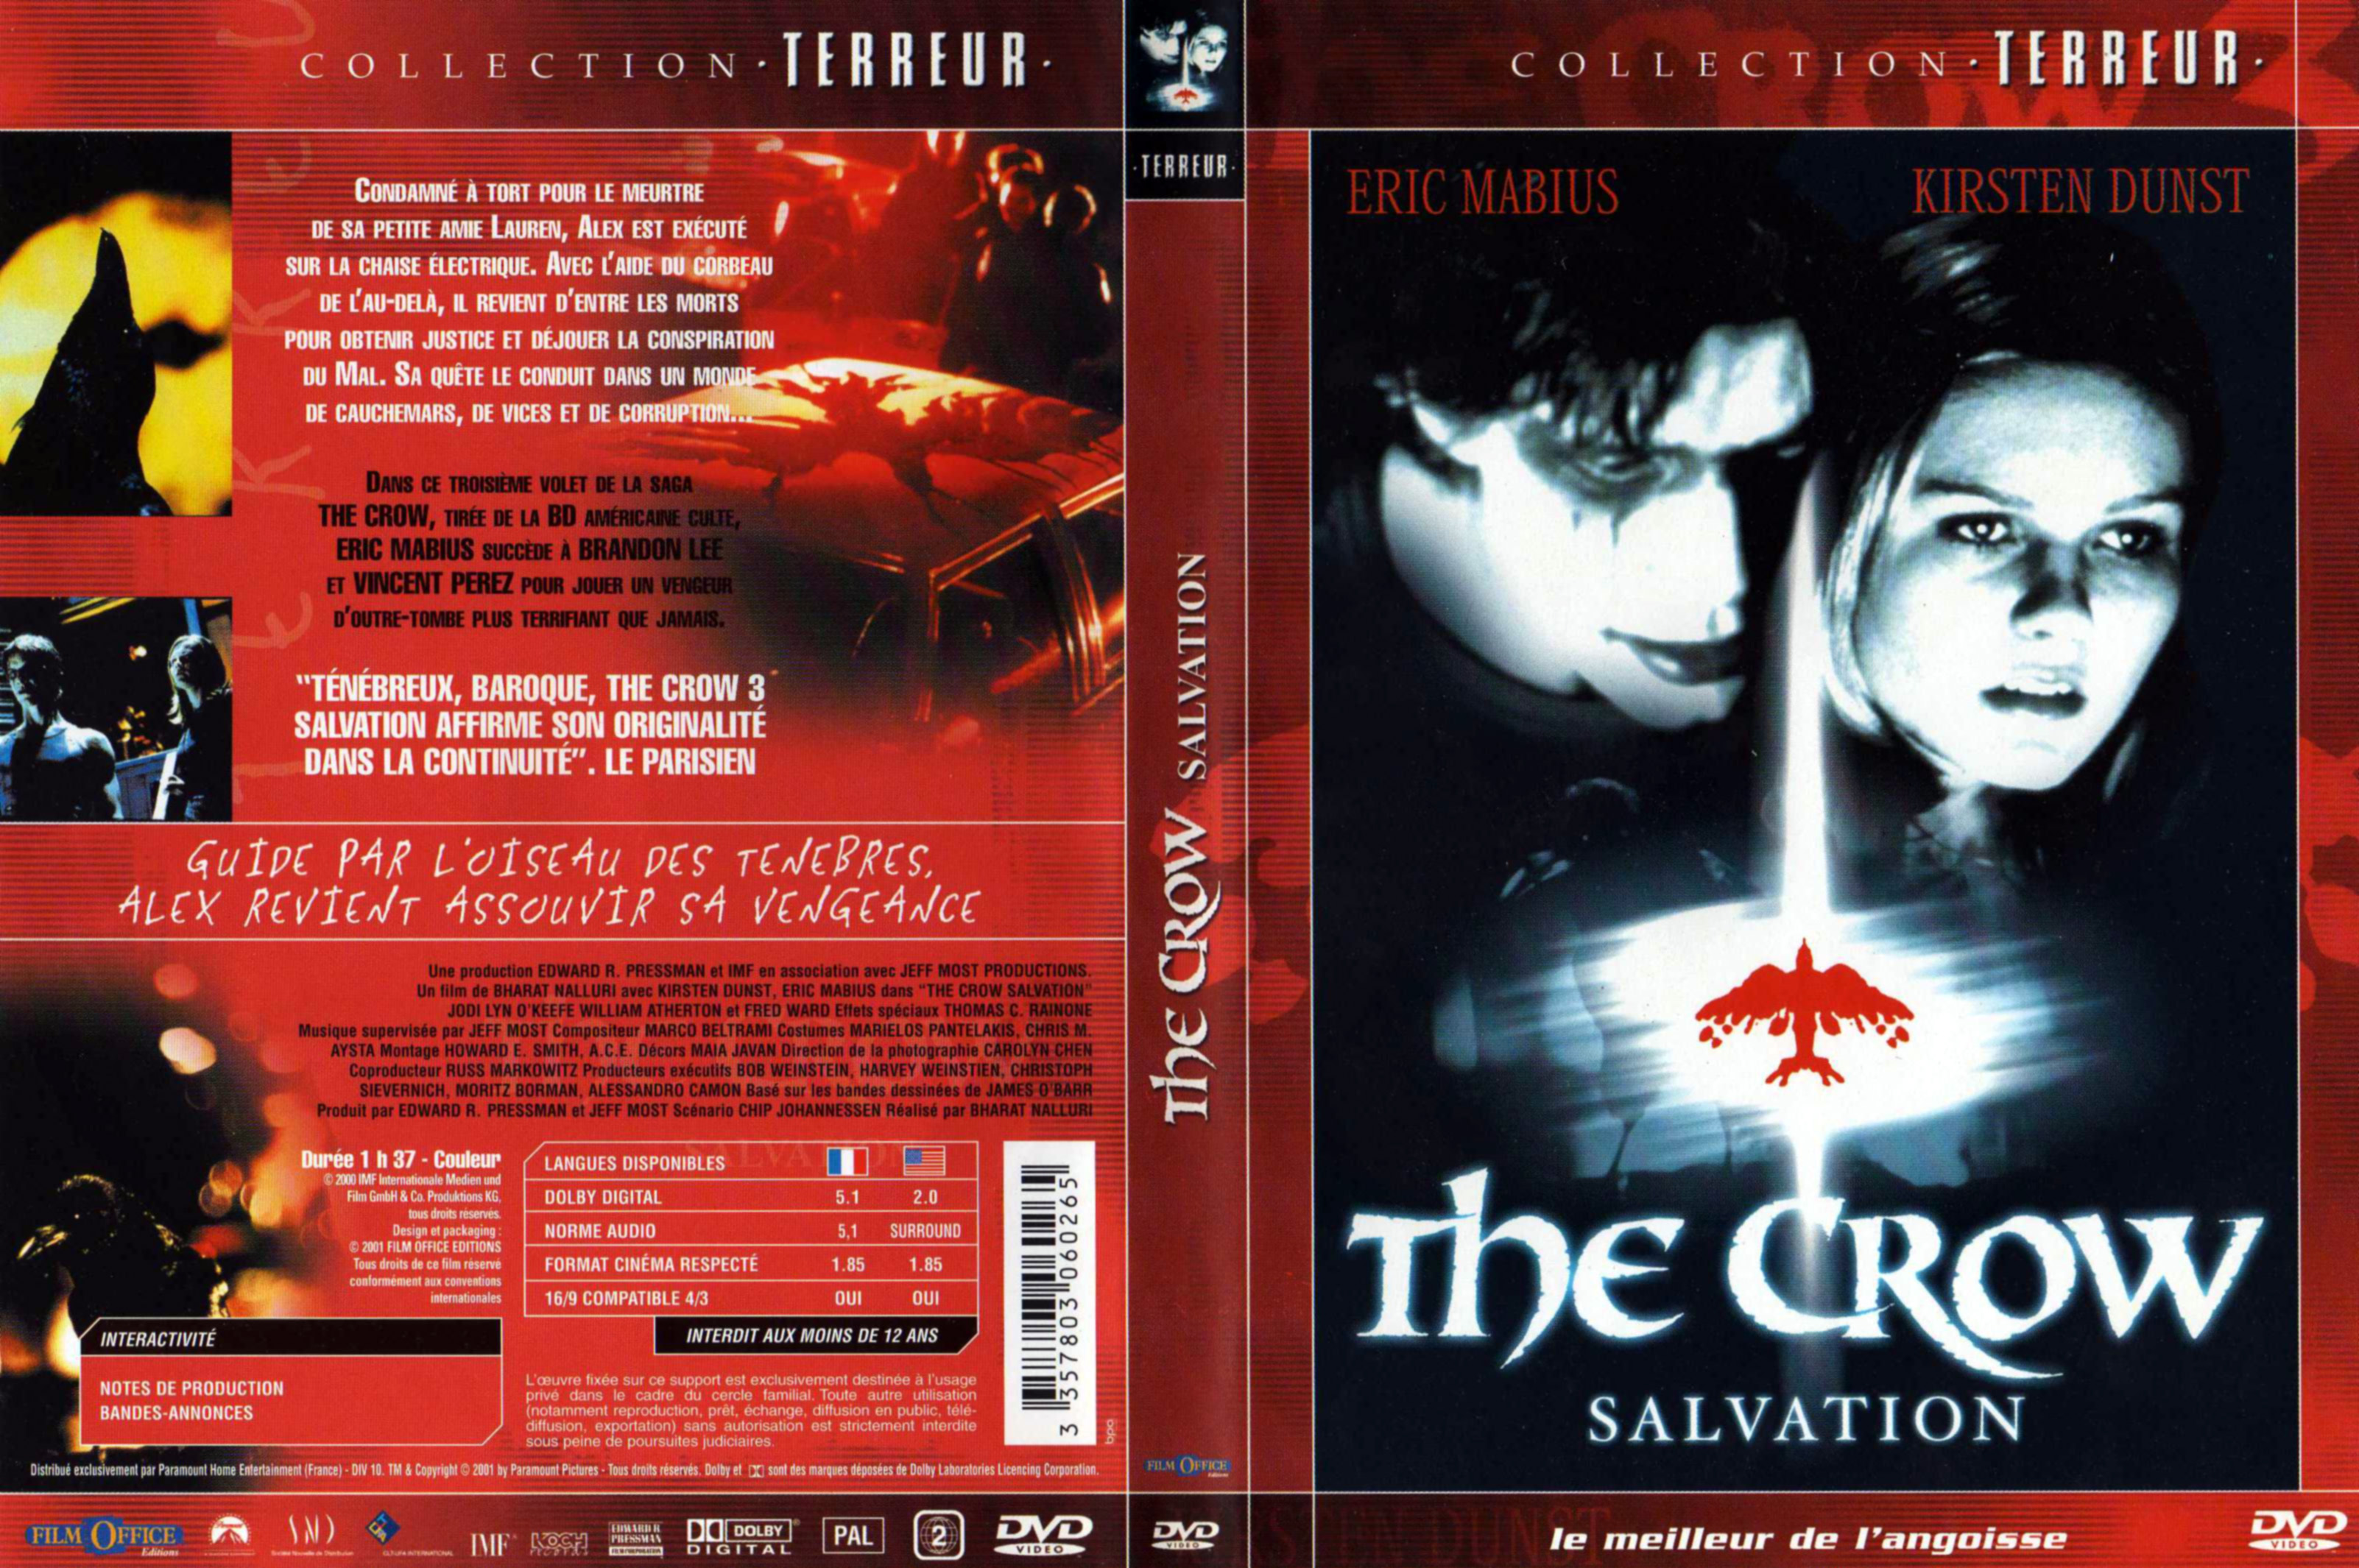 Jaquette DVD The crow salvation v2